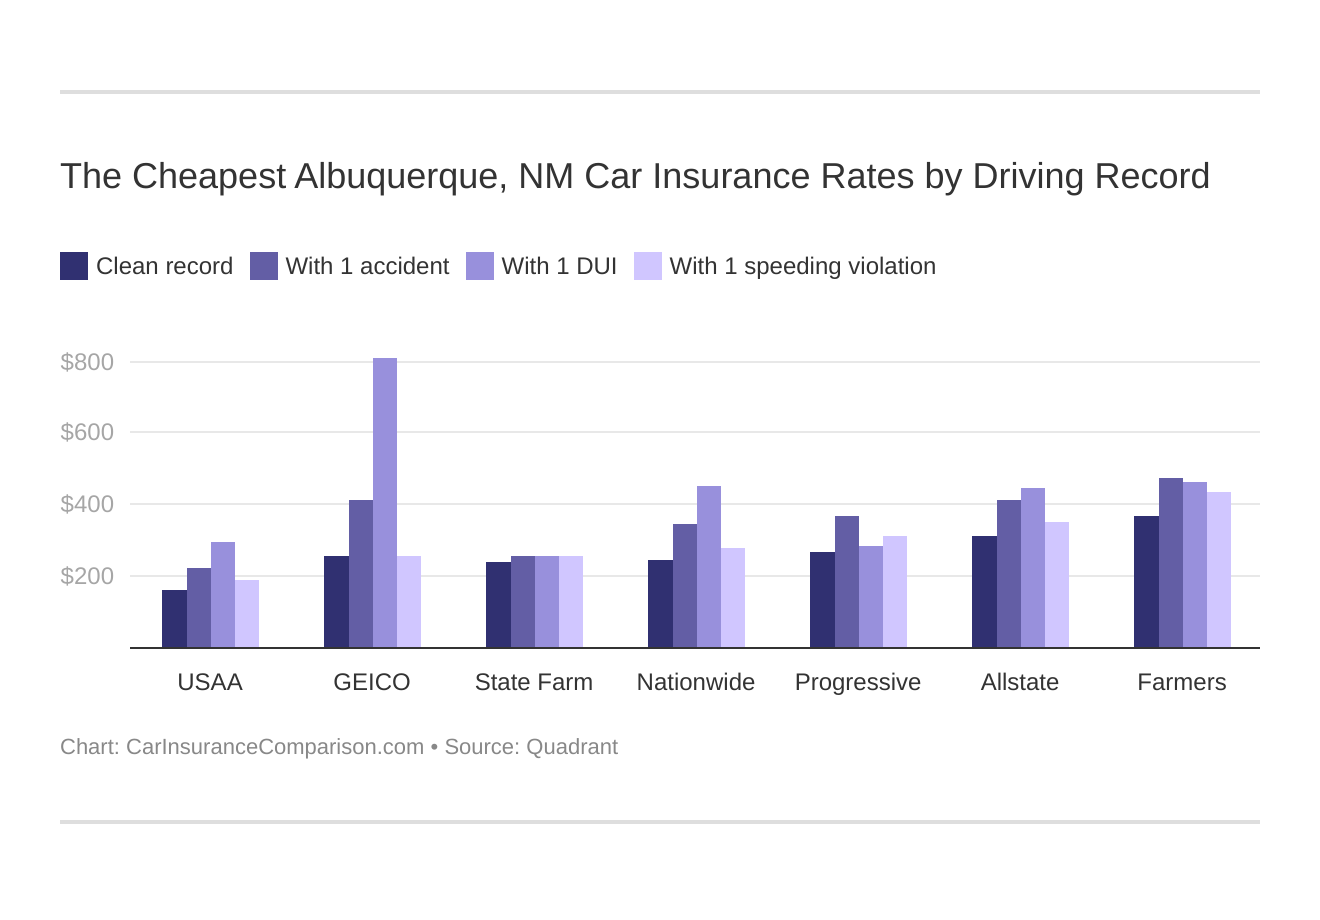 The Cheapest Albuquerque, NM Car Insurance Rates by Driving Record